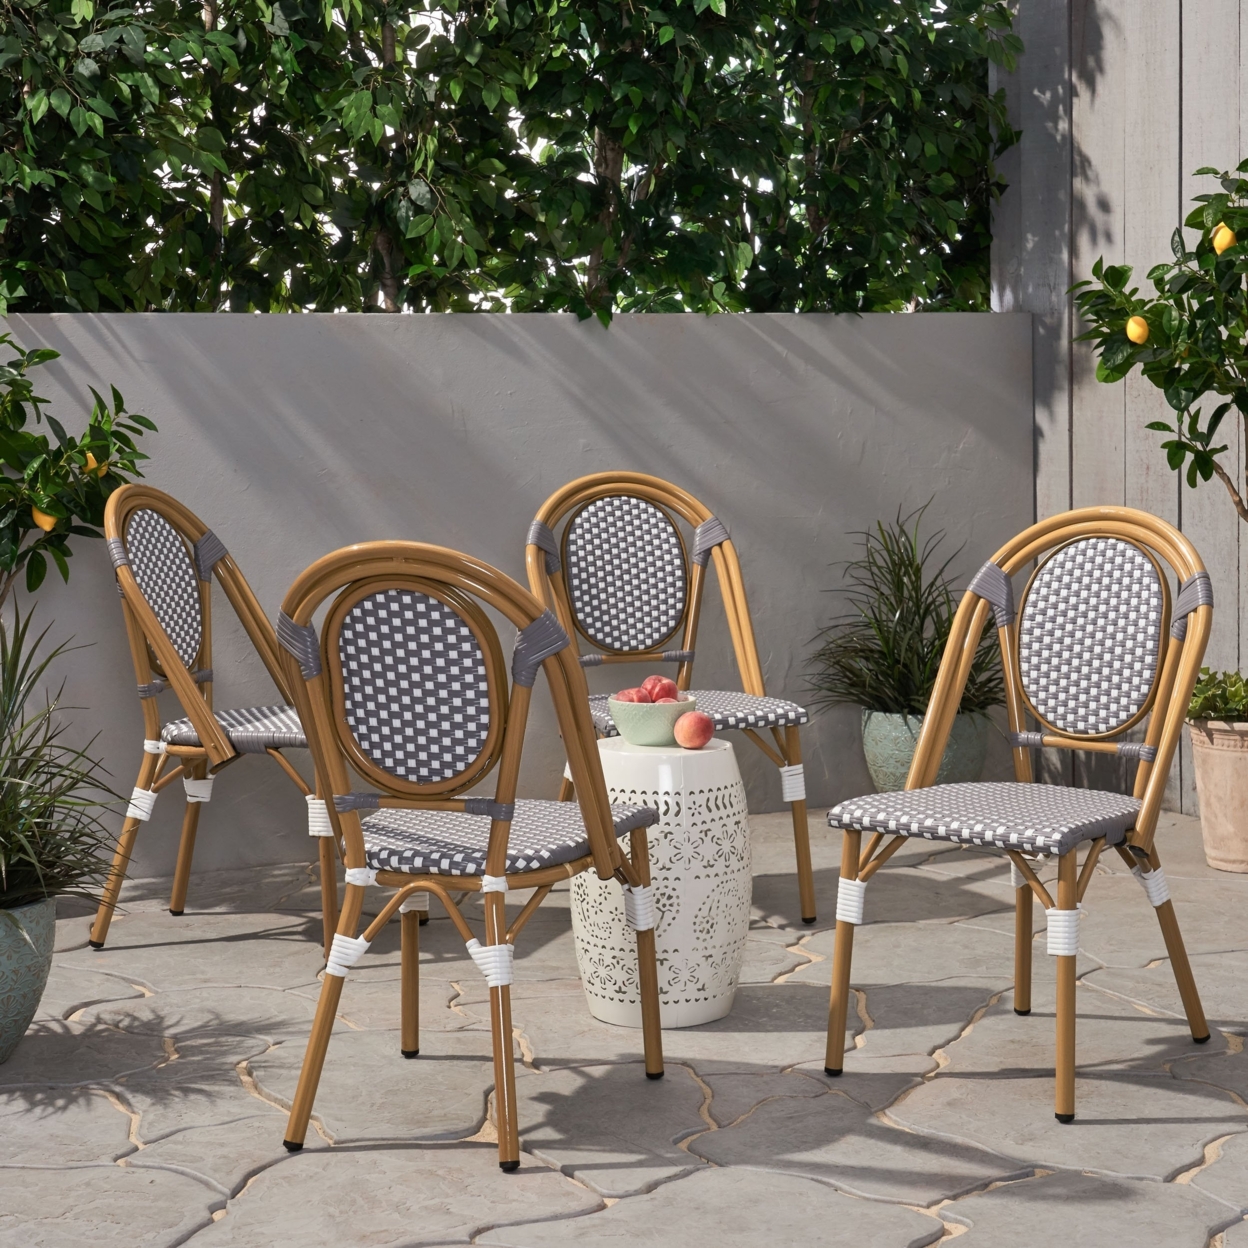 Kazaria Outdoor French Bistro Chairs (Set Of 4) - Blue